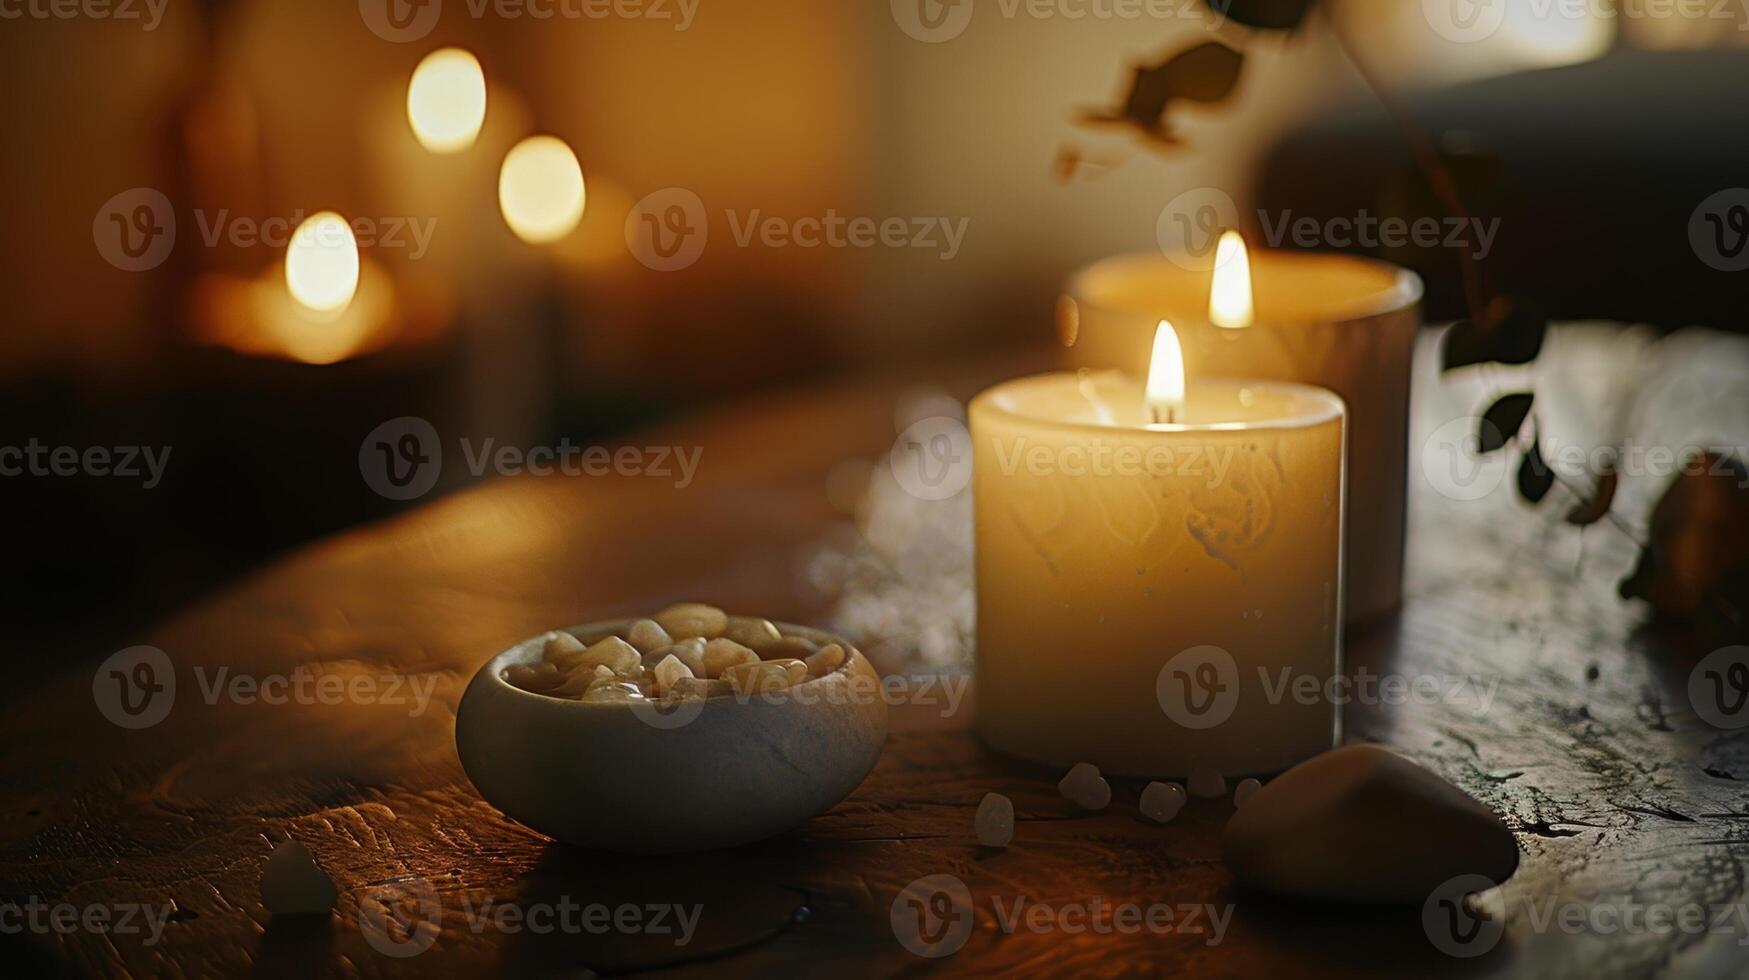 Soft music plays in the background adding to the soothing ambiance of the candlelit room. 2d flat cartoon photo